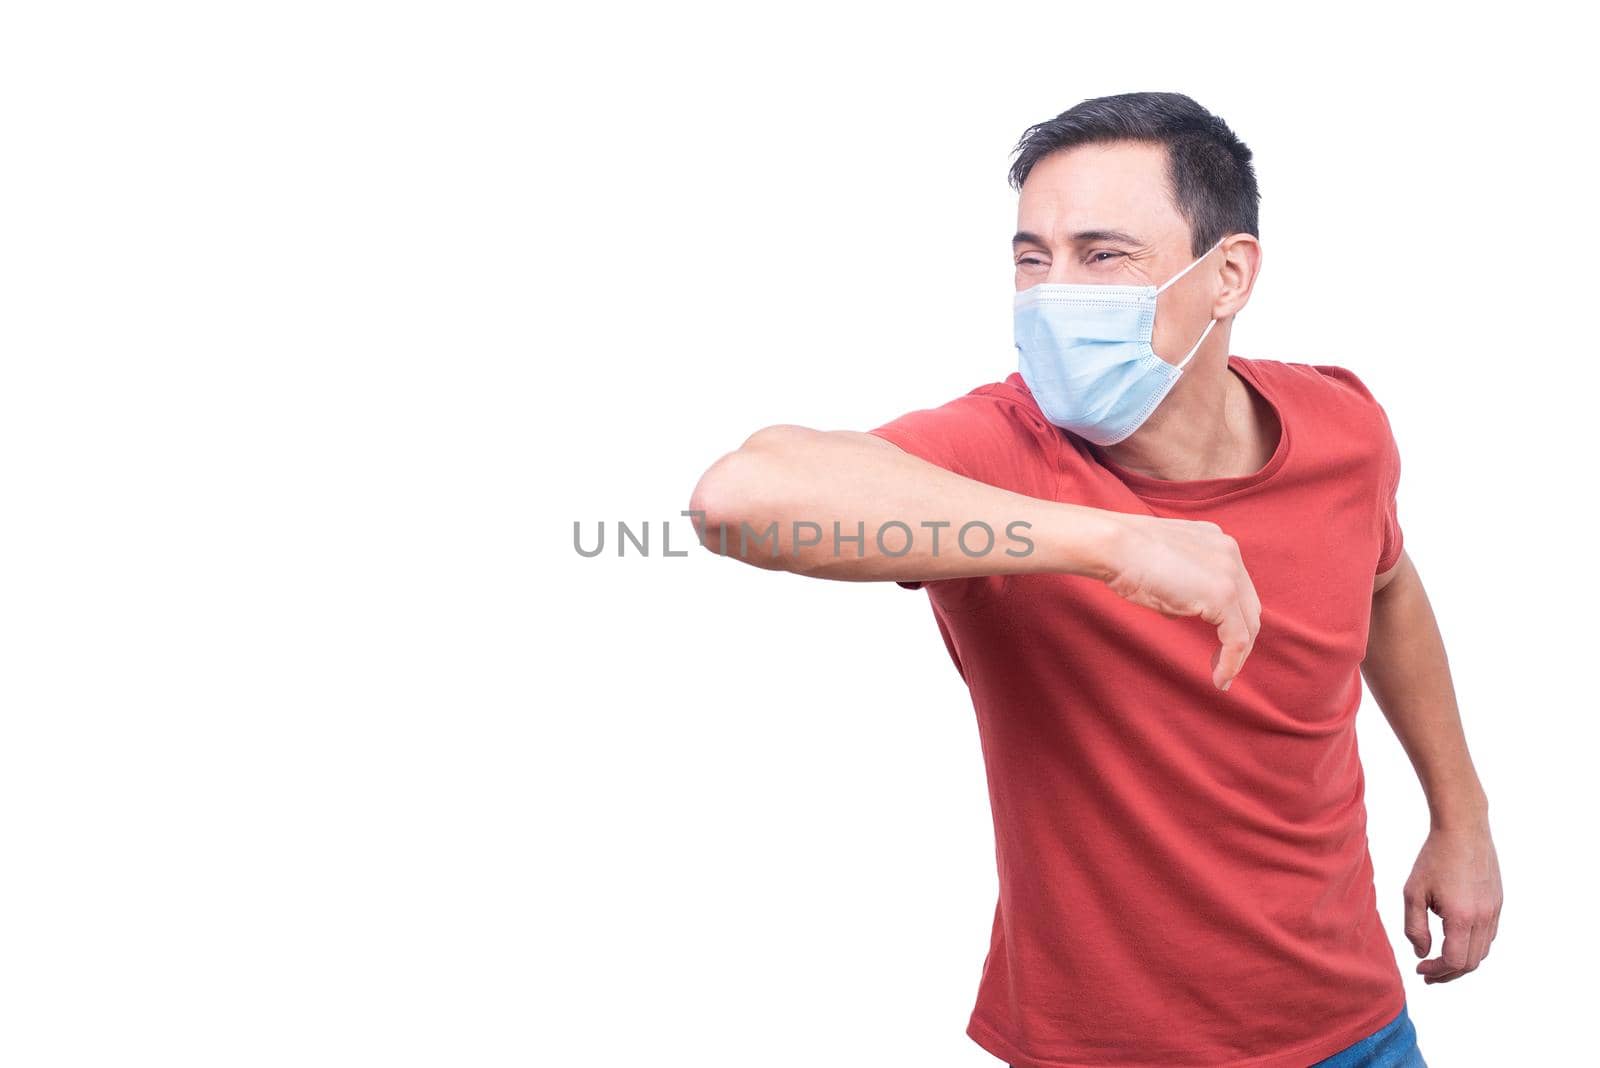 Content male in medical mask doing greeting gesture with elbow bump during coronavirus pandemic isolated on white background in studio